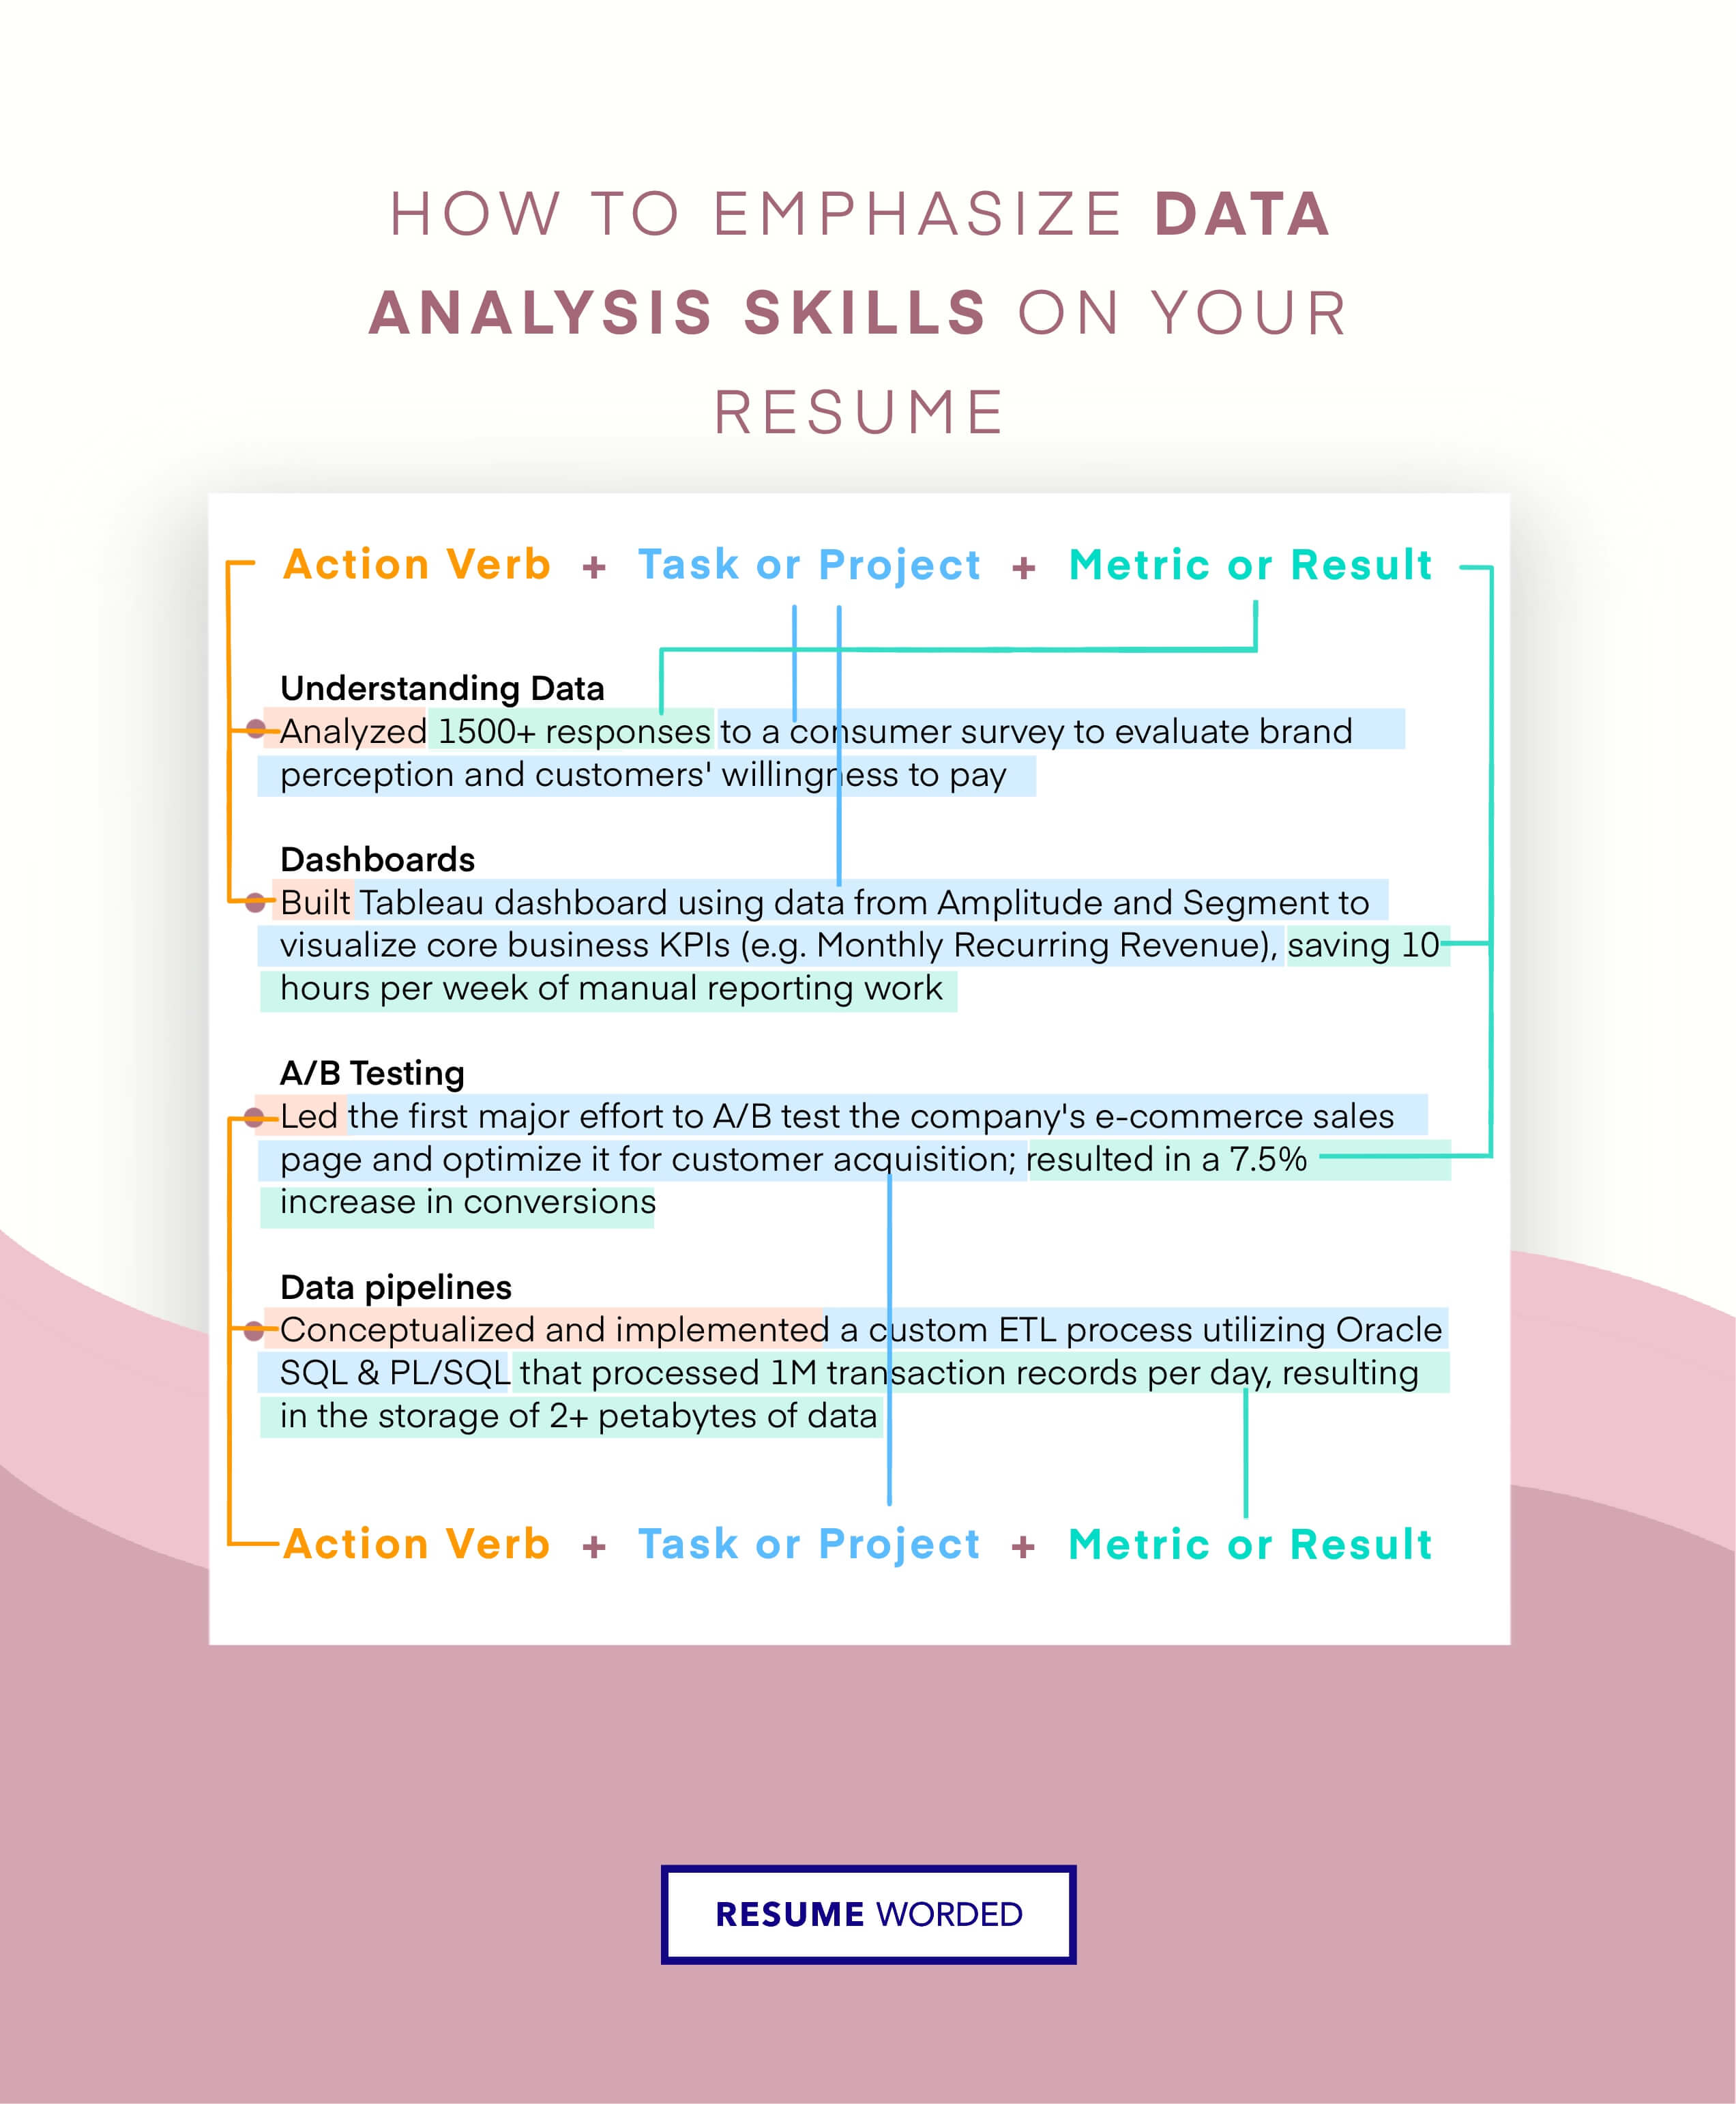 Showcase your understanding of data analysis - Entry-Level Case Manager CV